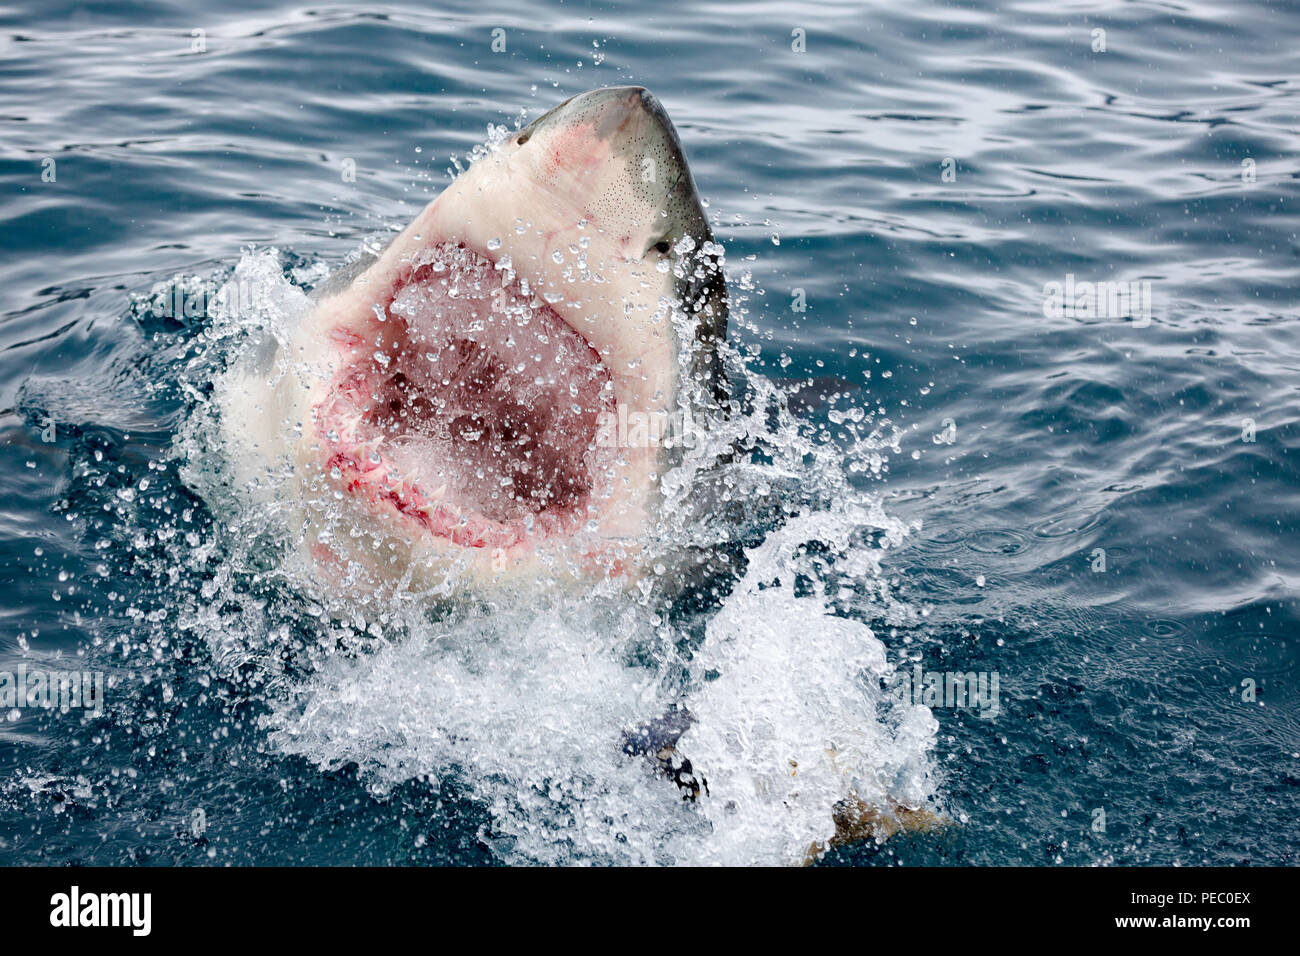 With open mouth, a great white shark, Carcharodon carcharias, breaks the surface off Guadalupe Island, Mexico. Stock Photo